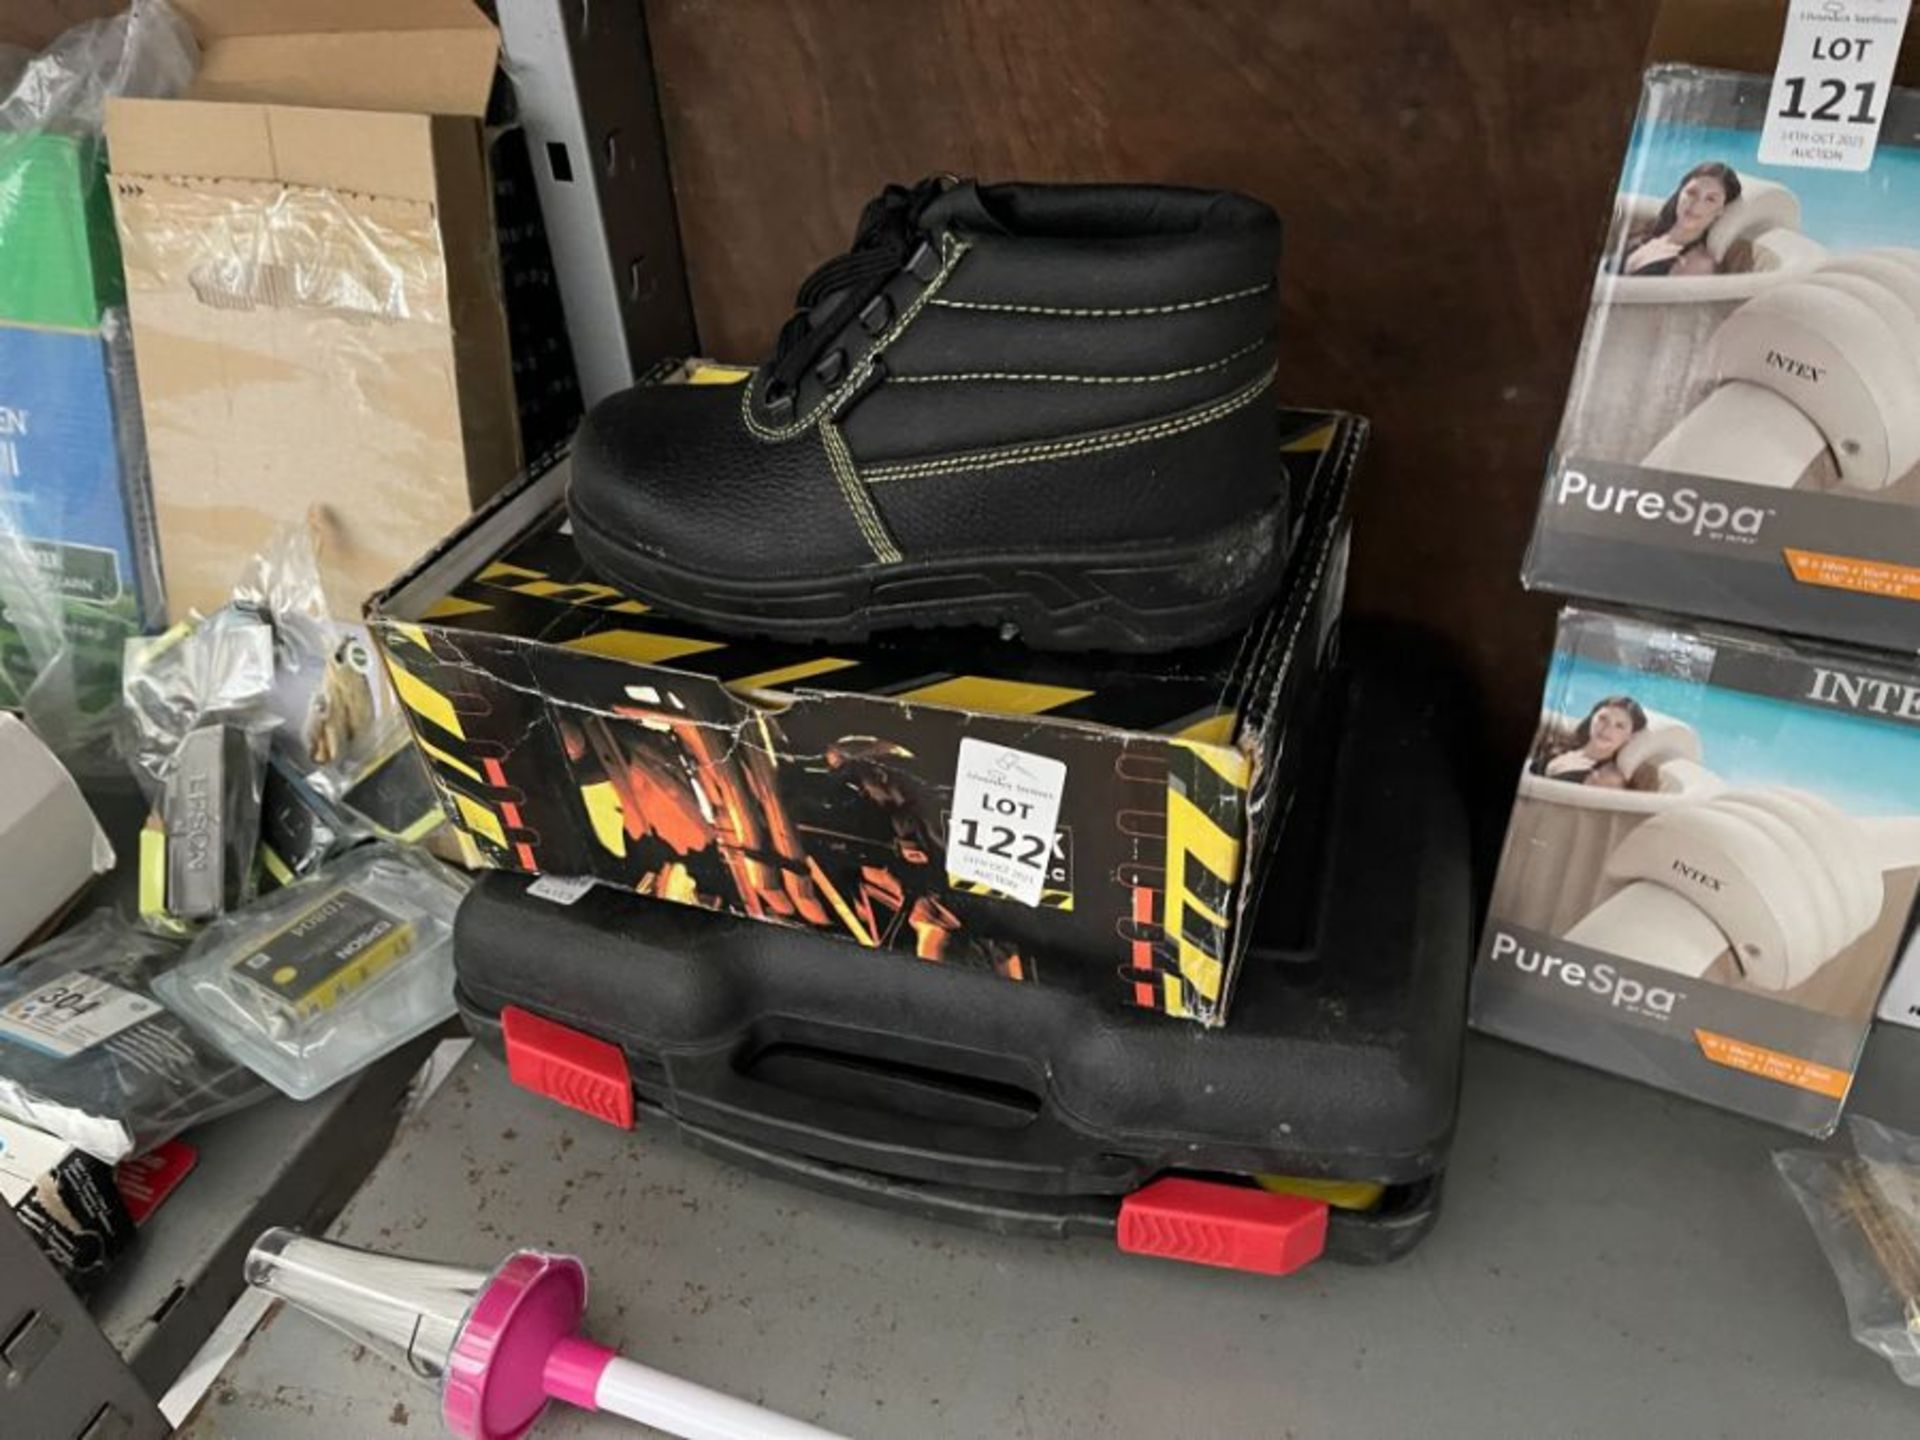 PAIR OF SIZE 37 STEEL TOE SAFETY BOOTS & CASE OF ASSORTED TOOL ITEMS